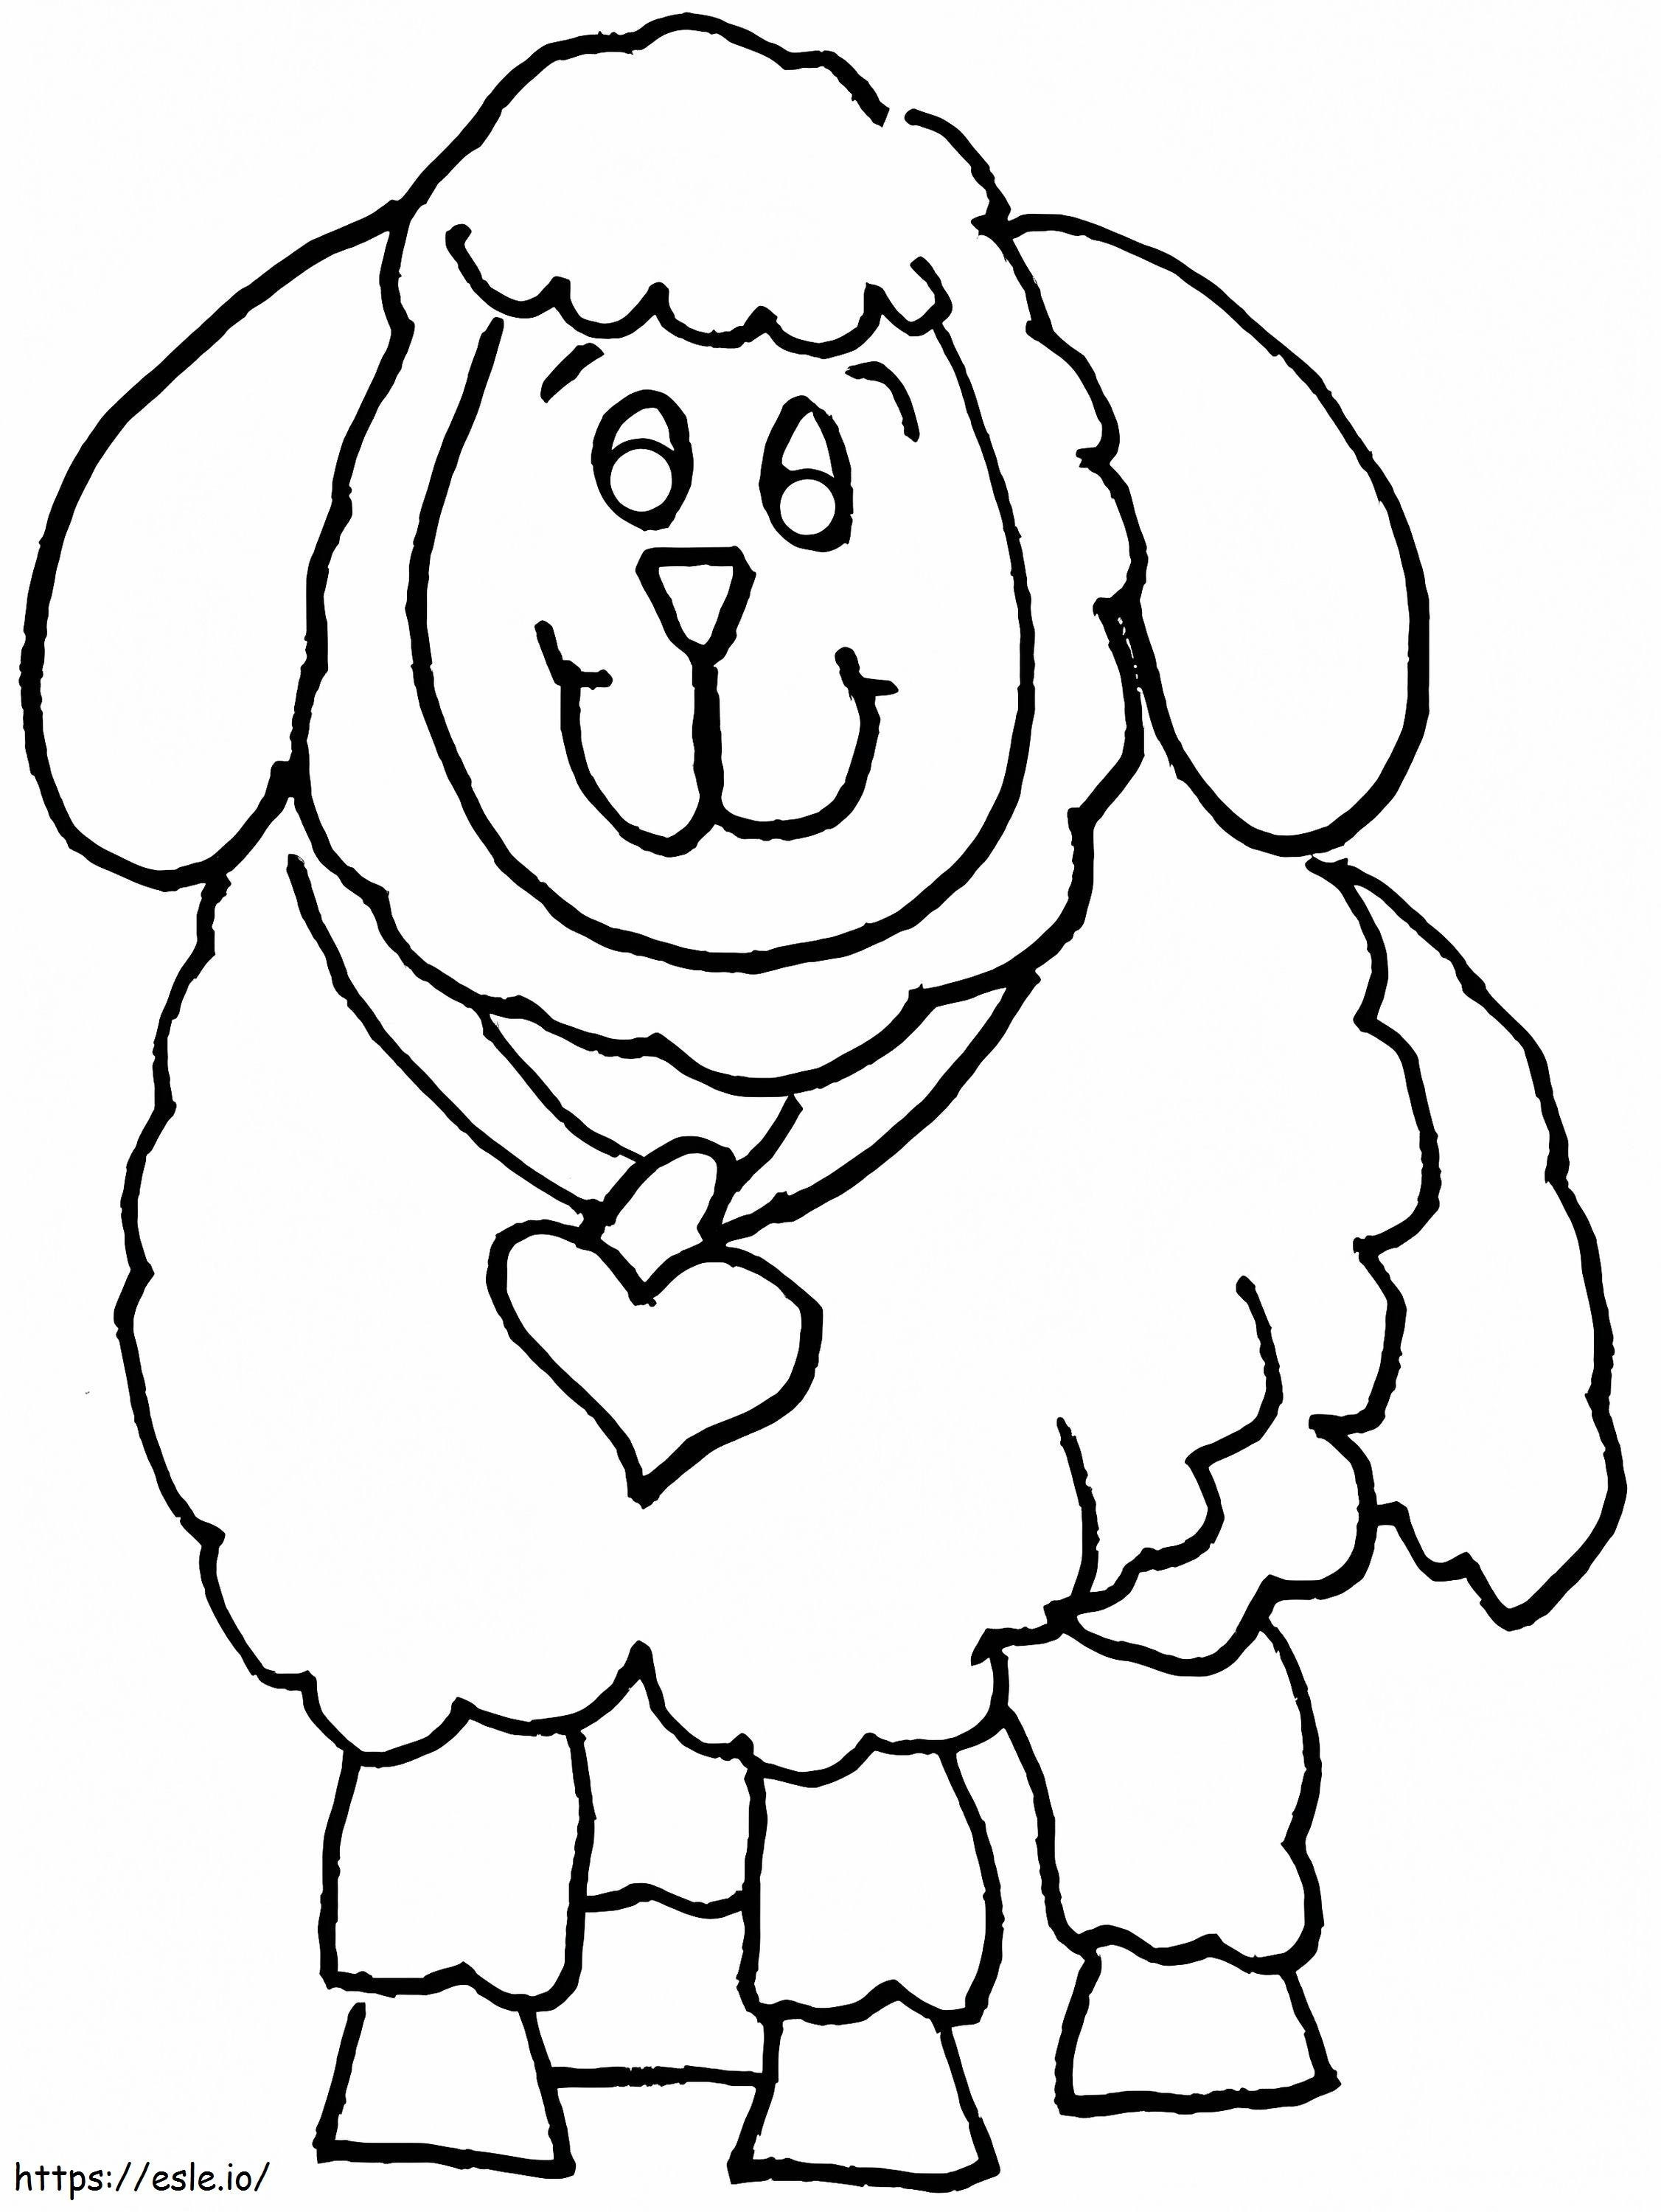 Sheep With Love Necklace coloring page